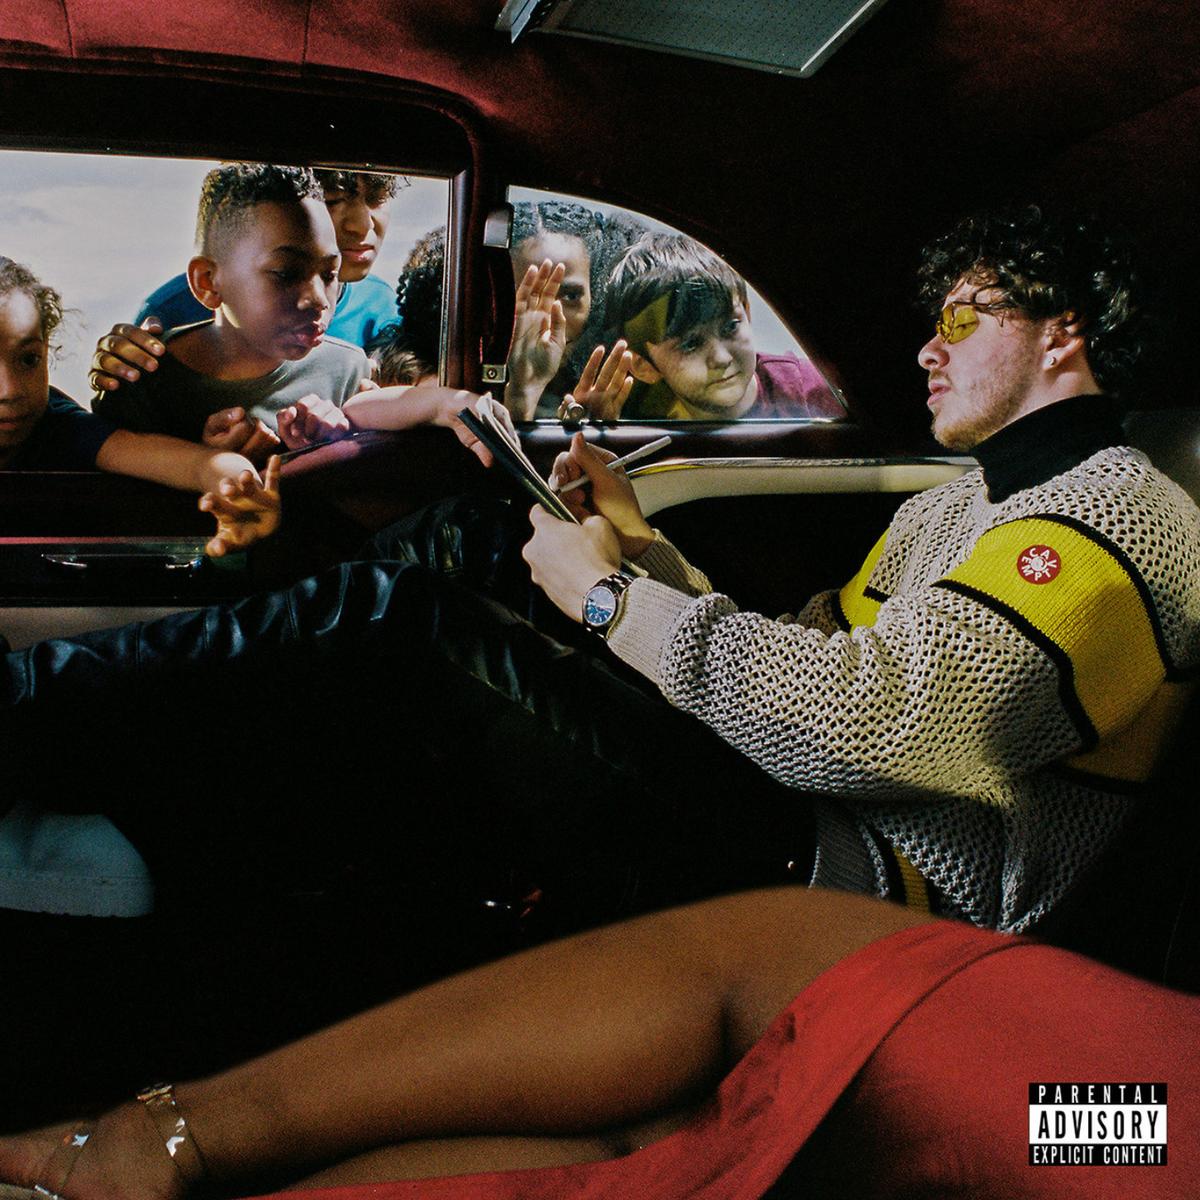 Jack Harlow – Thats What They All Say (Album Review)